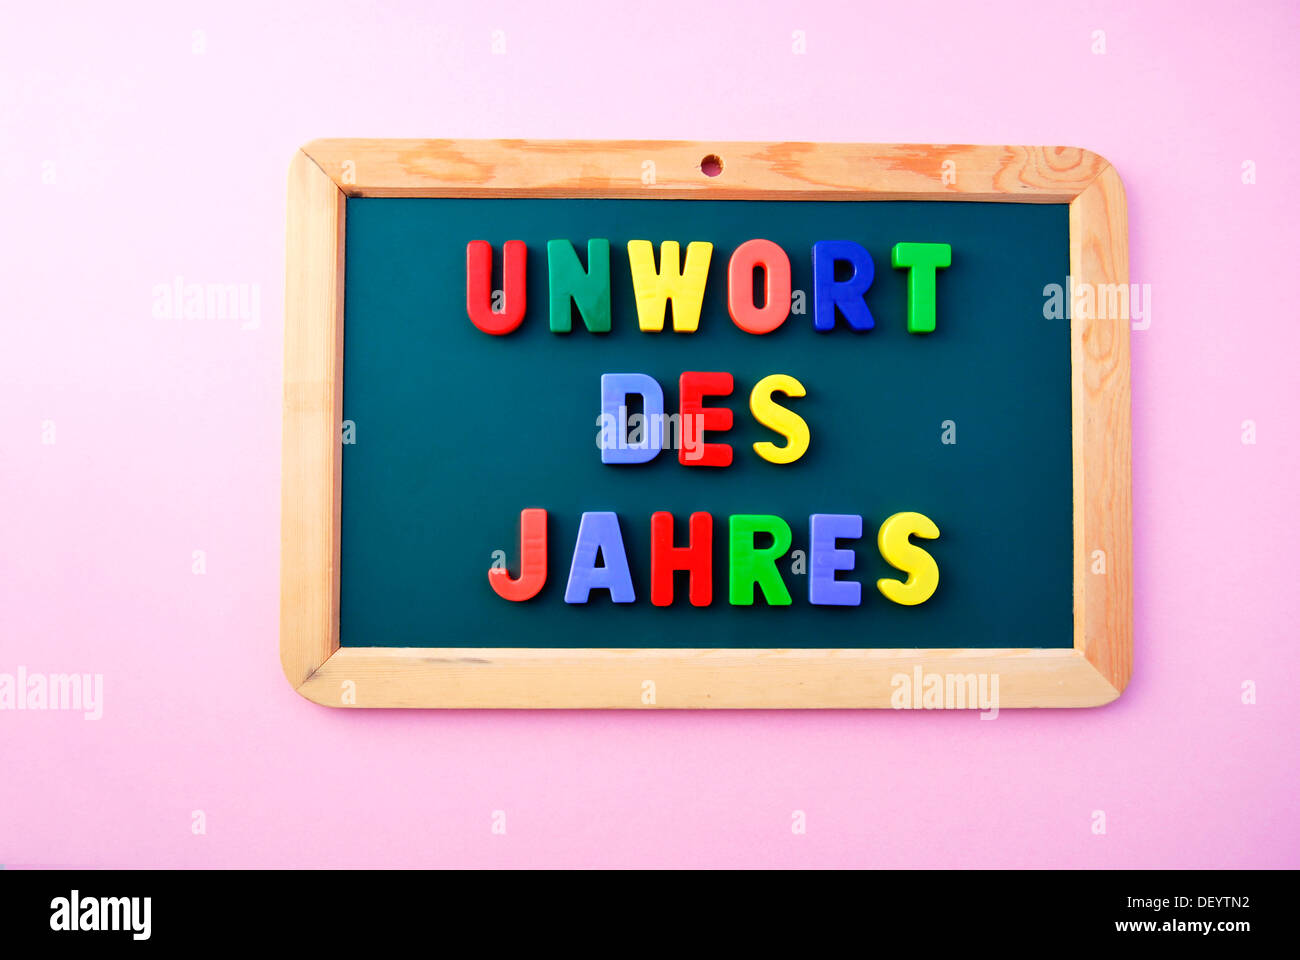 Unwort des Jahres, German for Worst Word of the Year, written in colourful magnetic letters on a school board Stock Photo